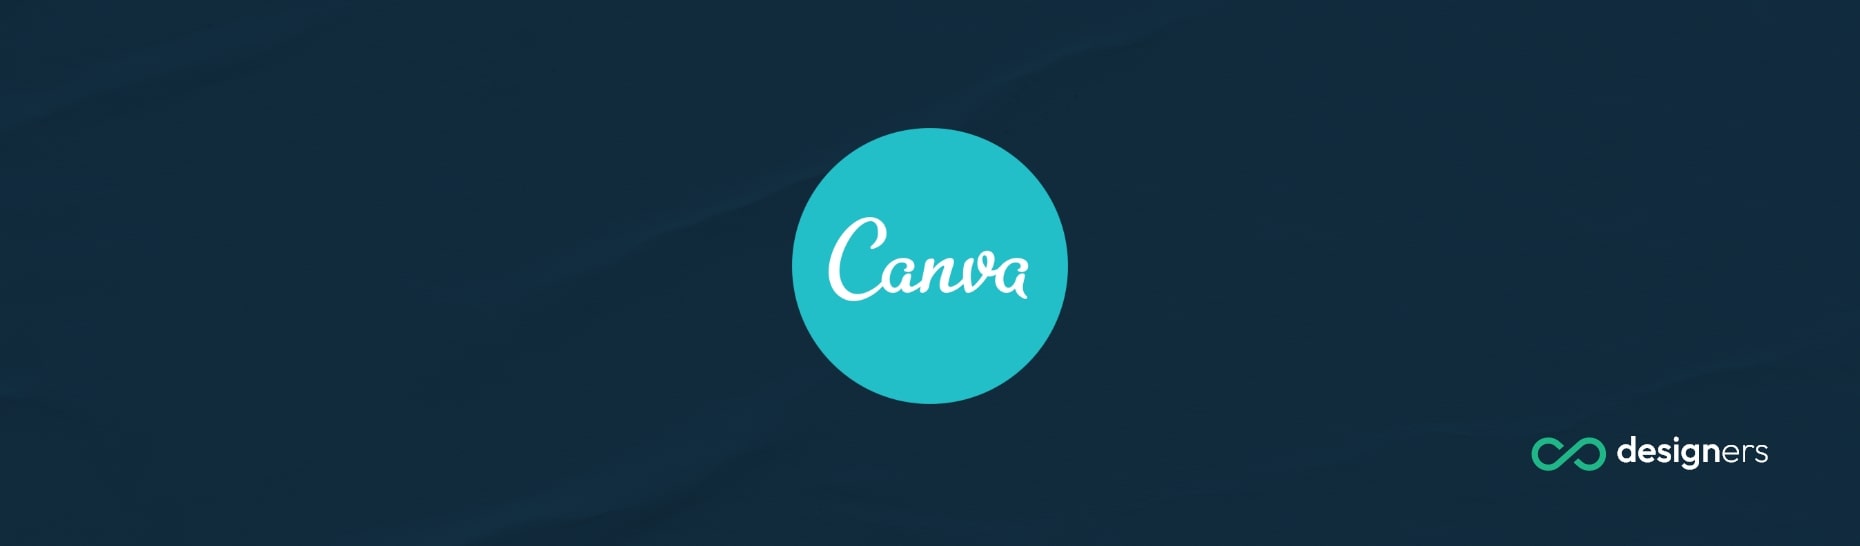 Does Canva Have a Marketplace?